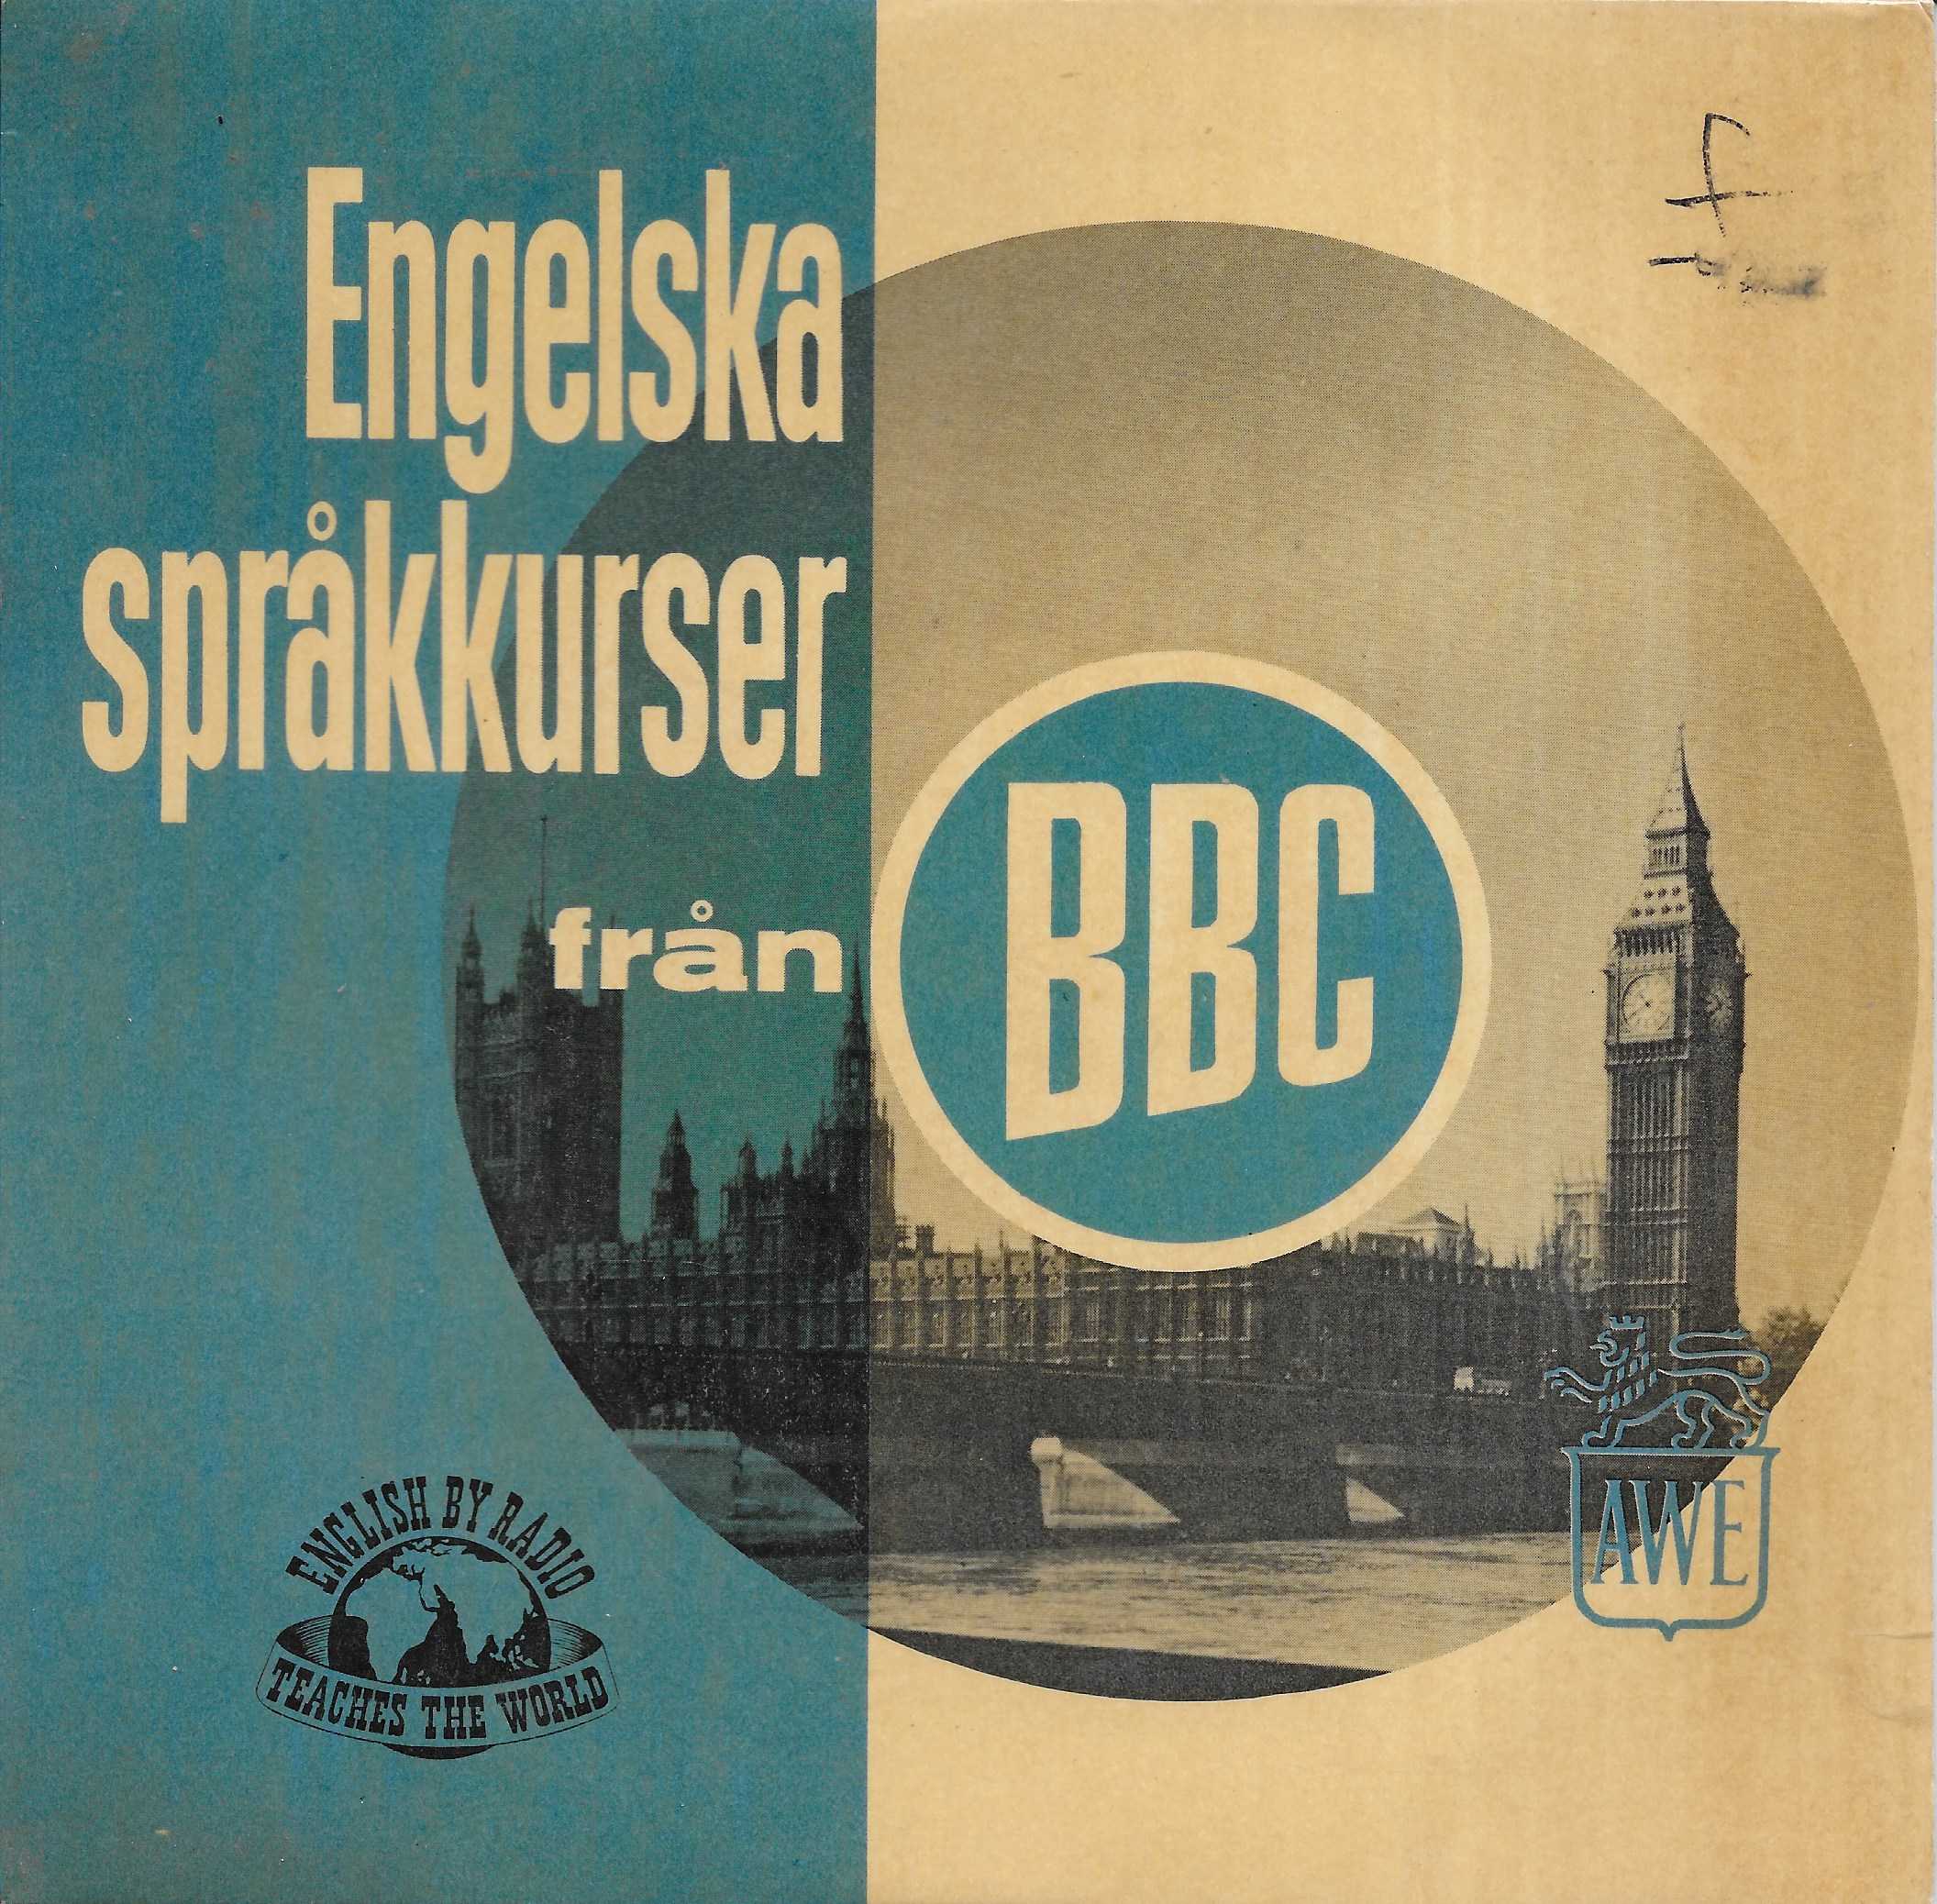 Picture of SELA 352 Provskiva by artist Unknown from the BBC singles - Records and Tapes library